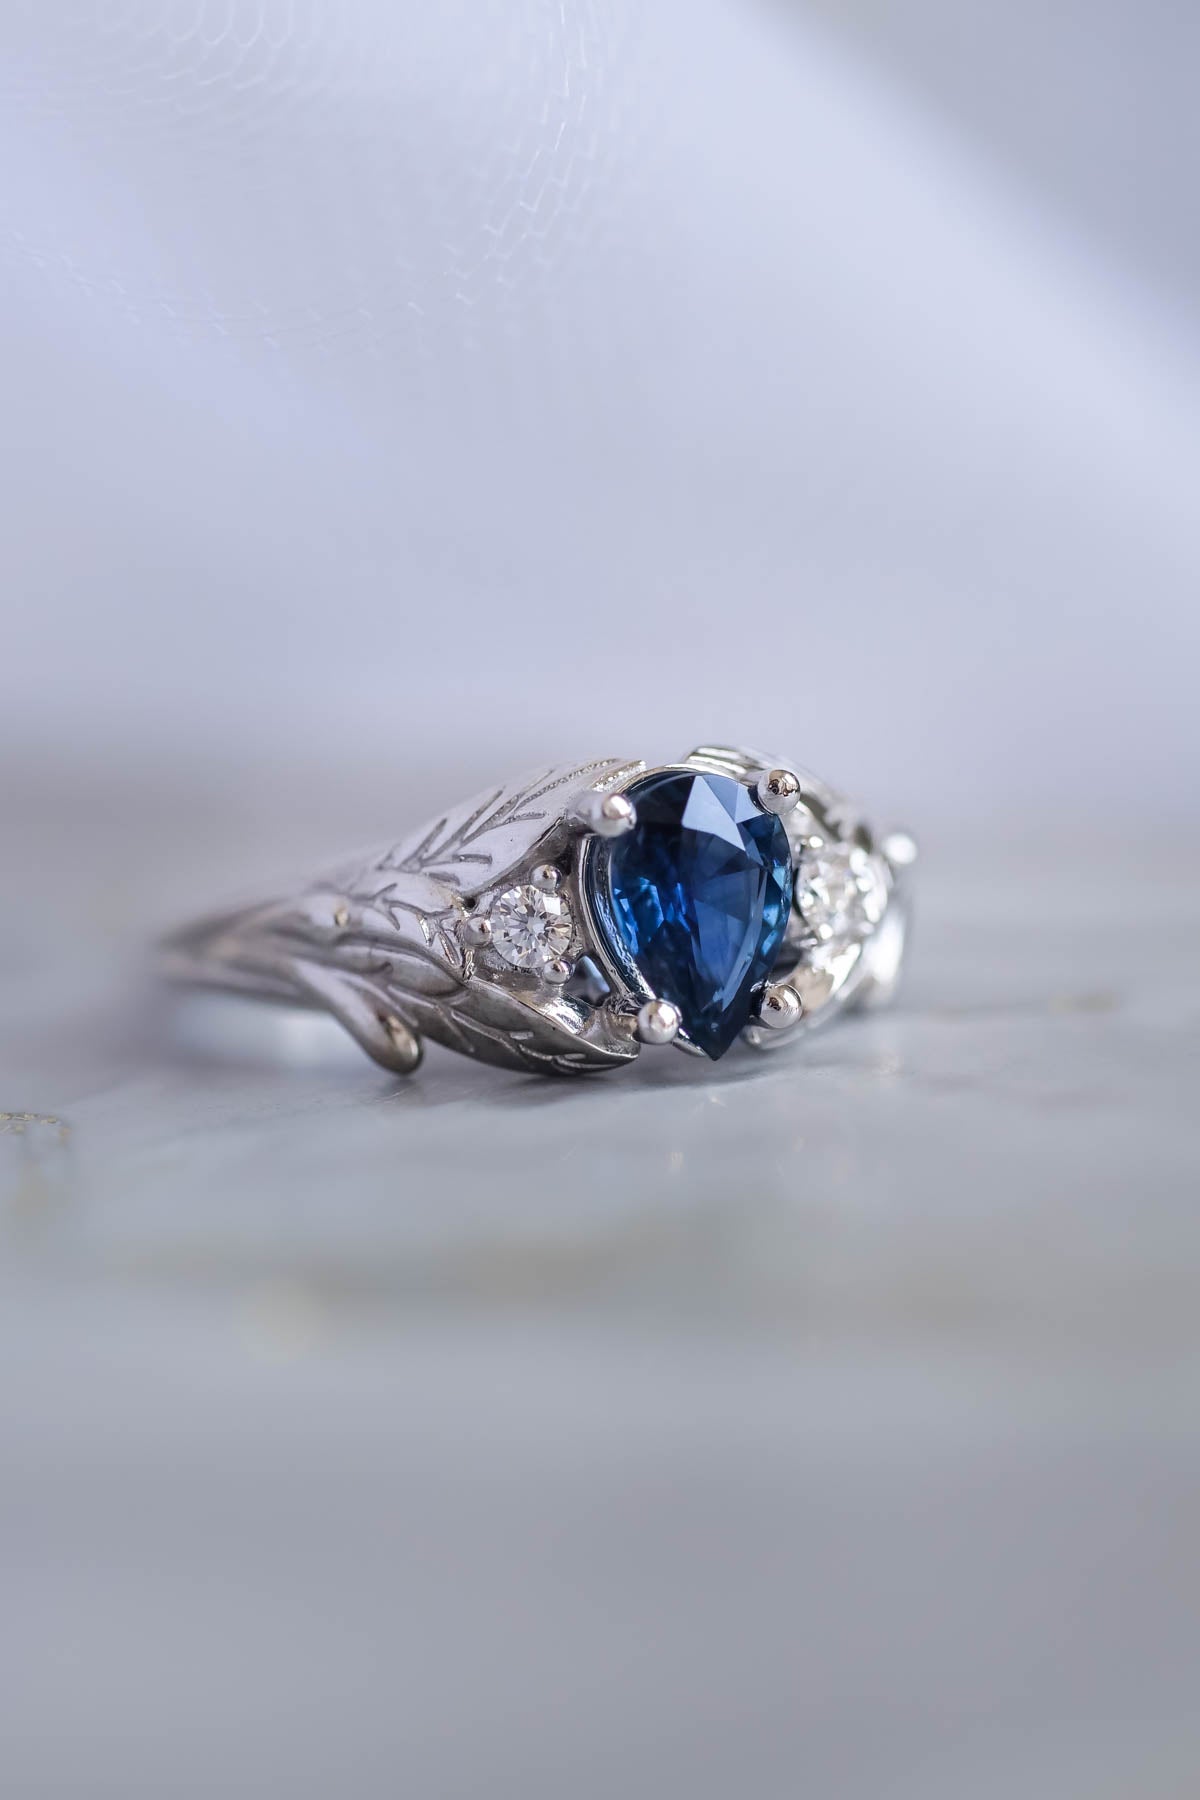 Raw Sapphire Montana sapphire 14k White Gold Engagement Ring Blue Wedd – by  Angeline